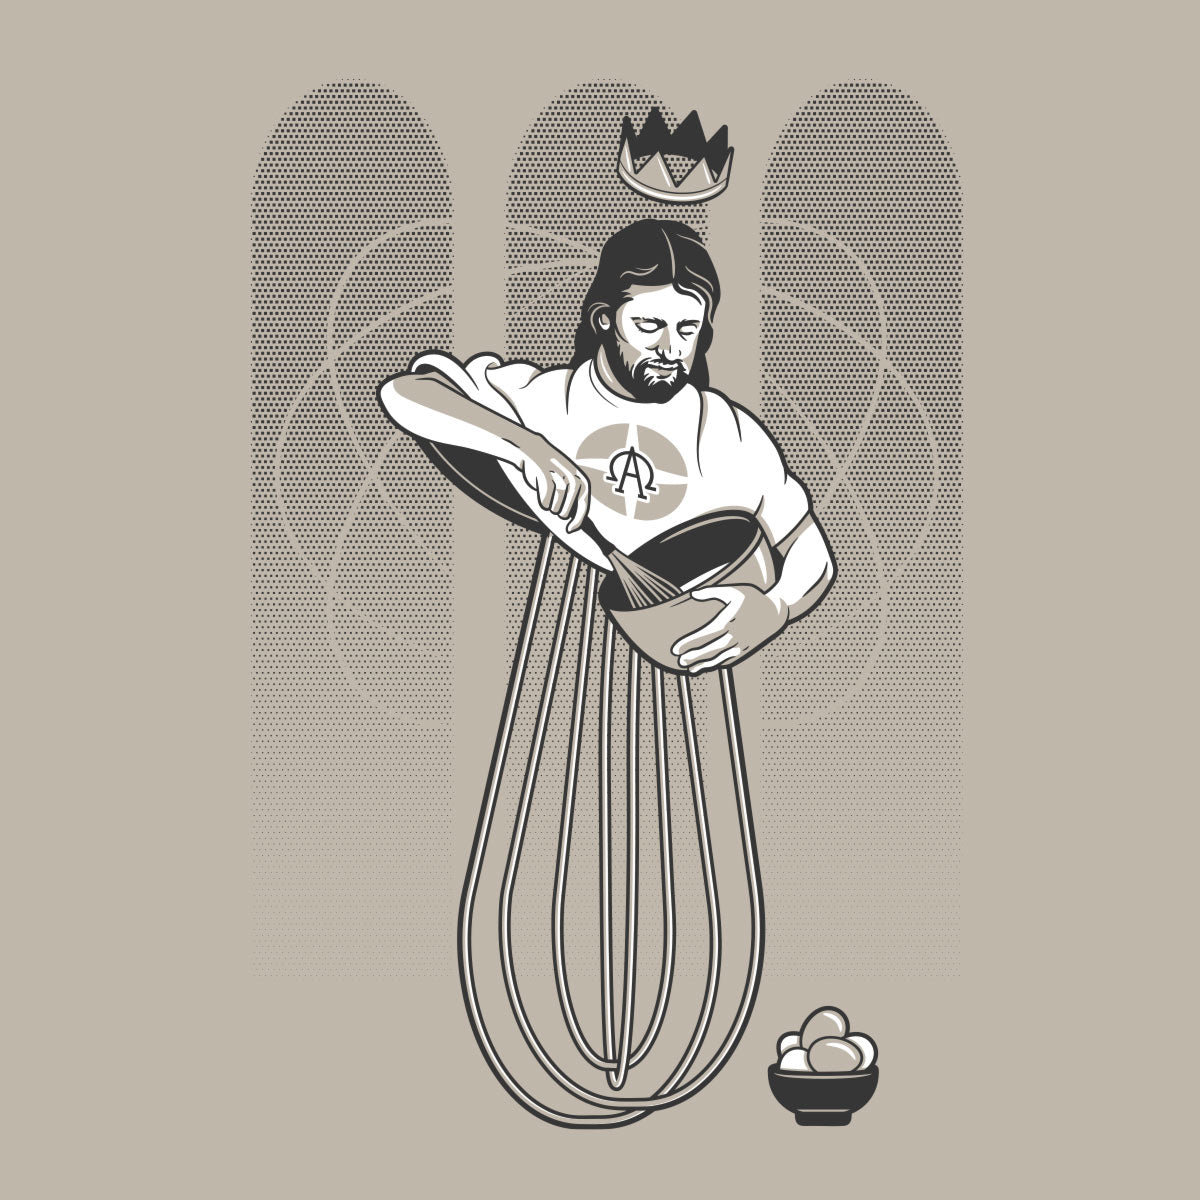 Thumbnail of Eggbeater Jesus with mixing bowl on grey background